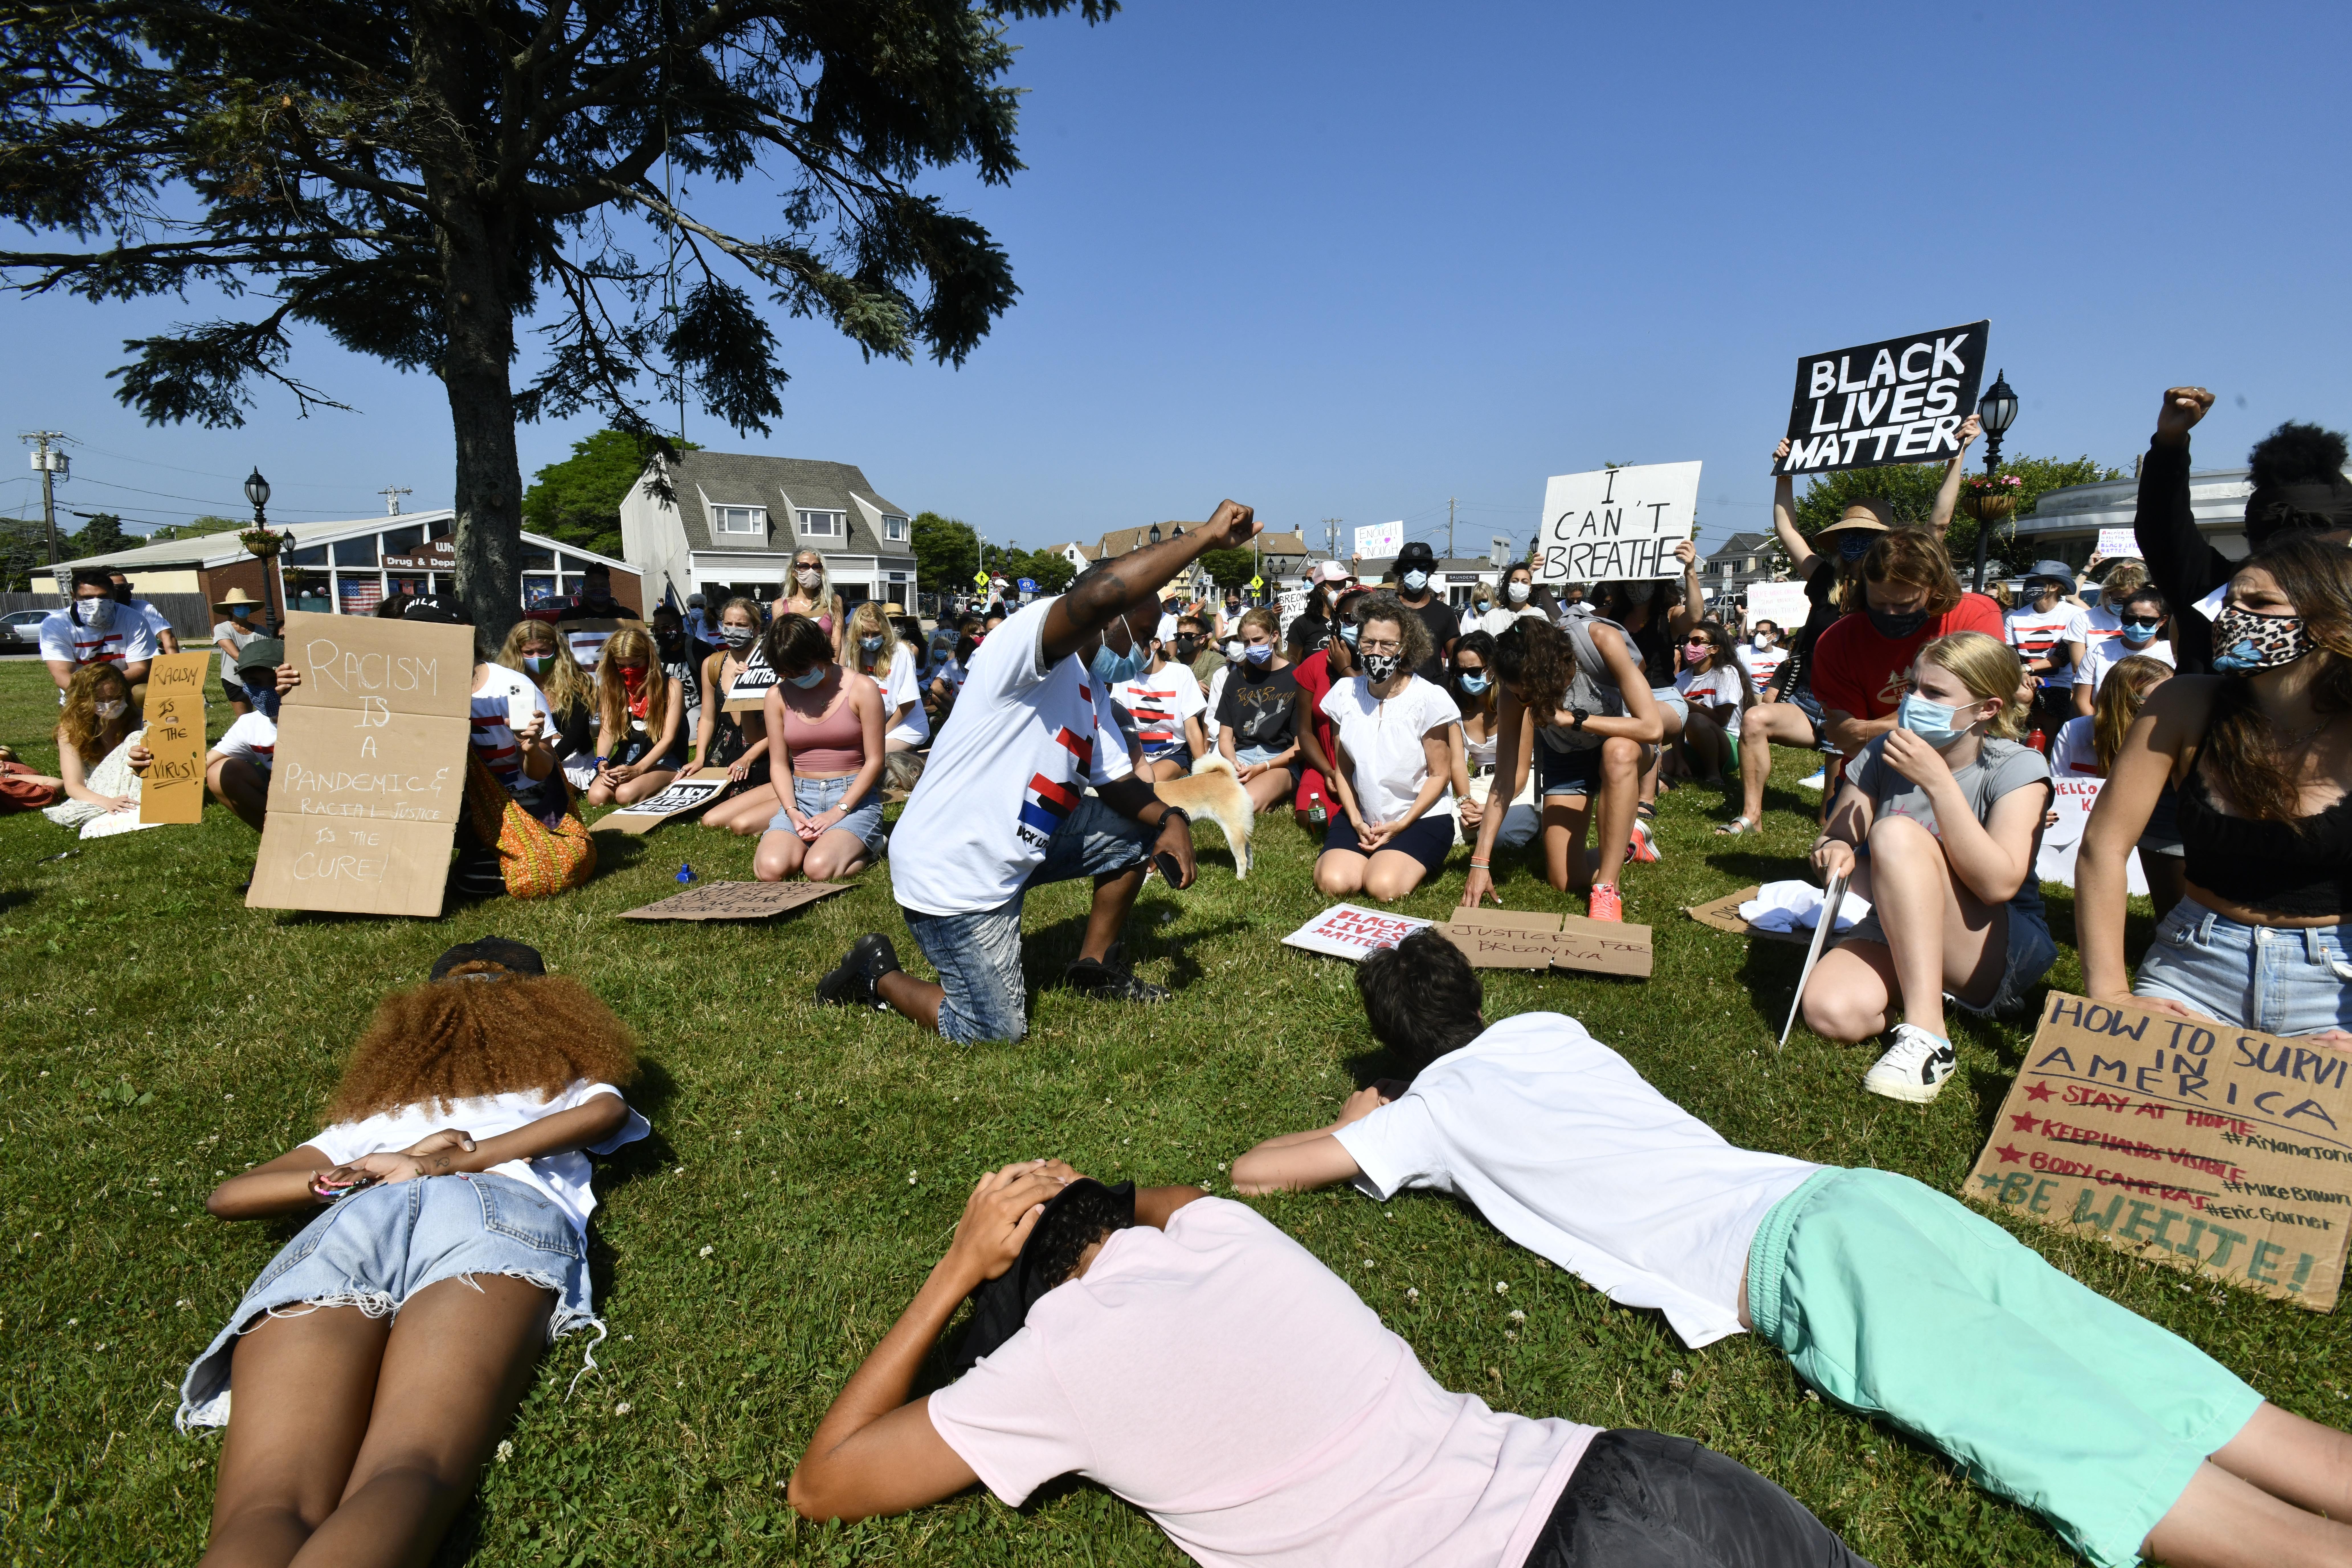 Protesters in Montauk on Monday.